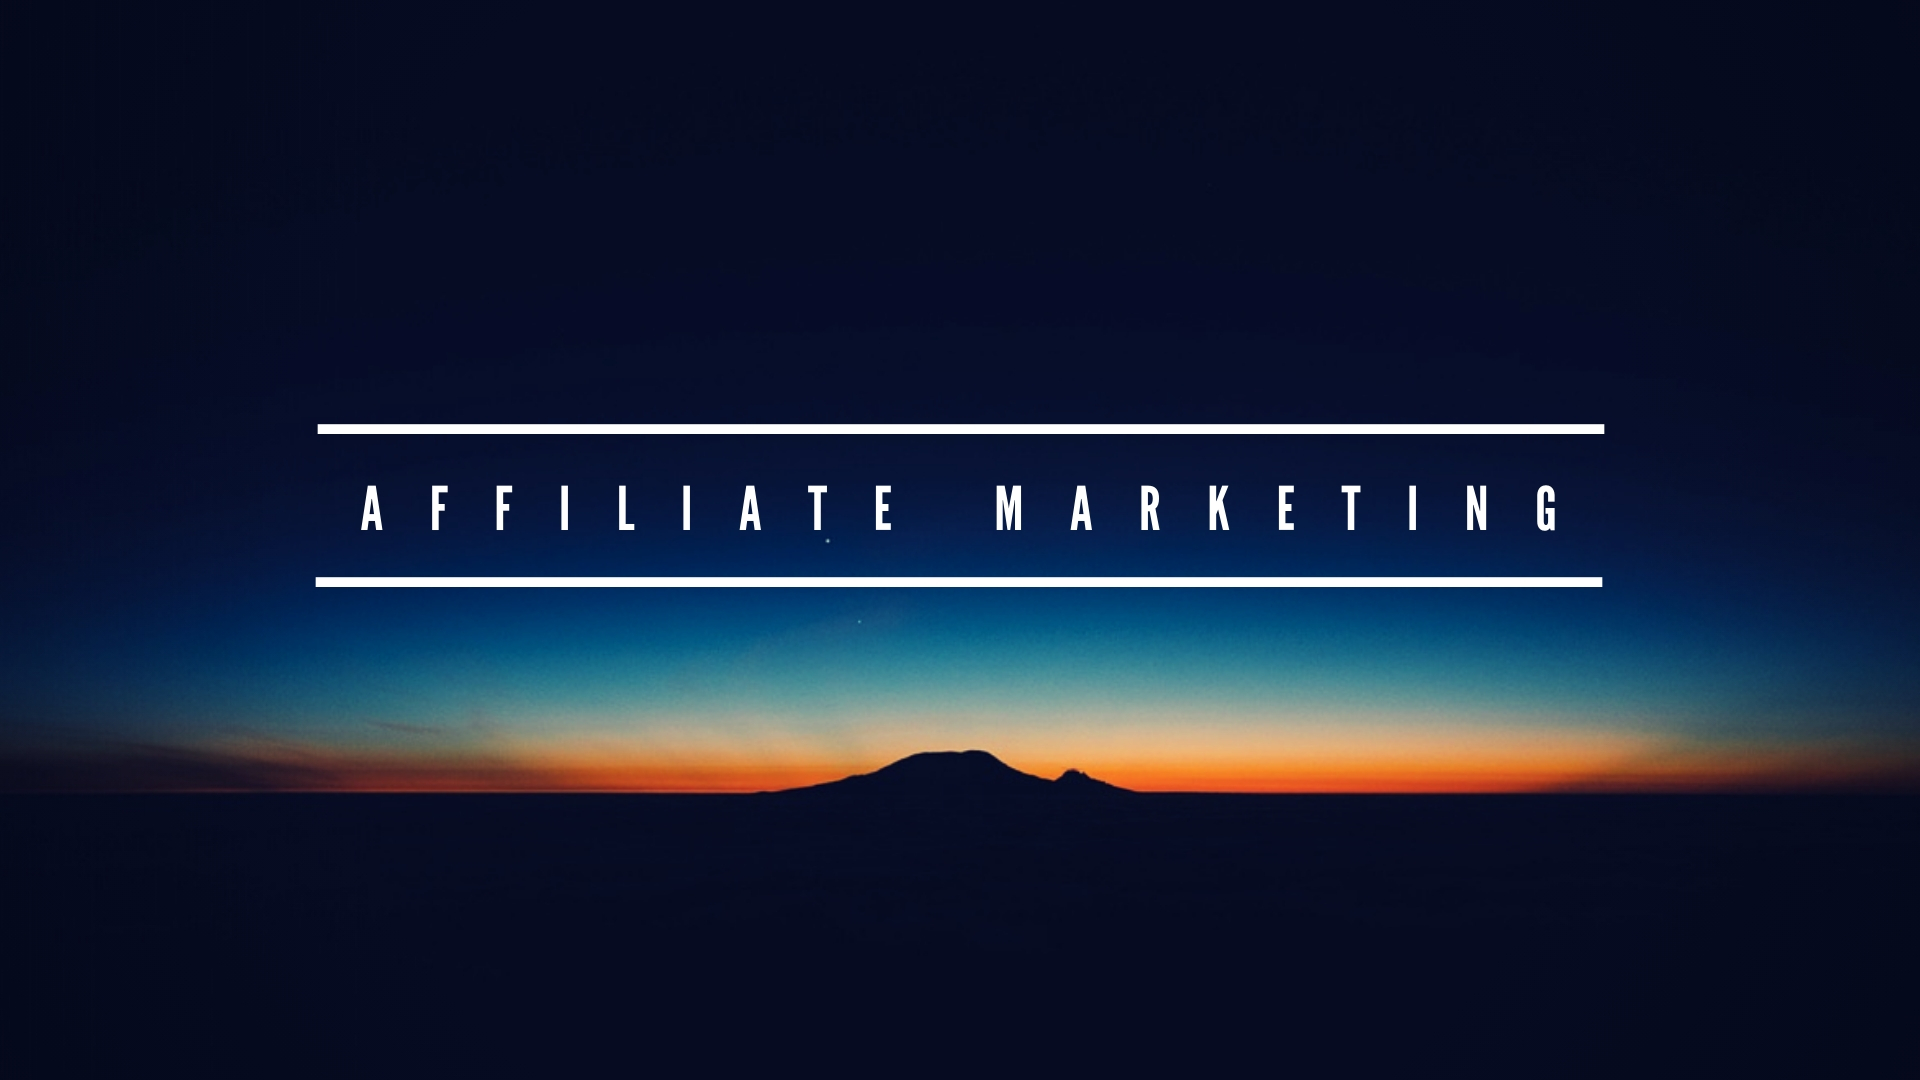 can i make money in affiliate marketing